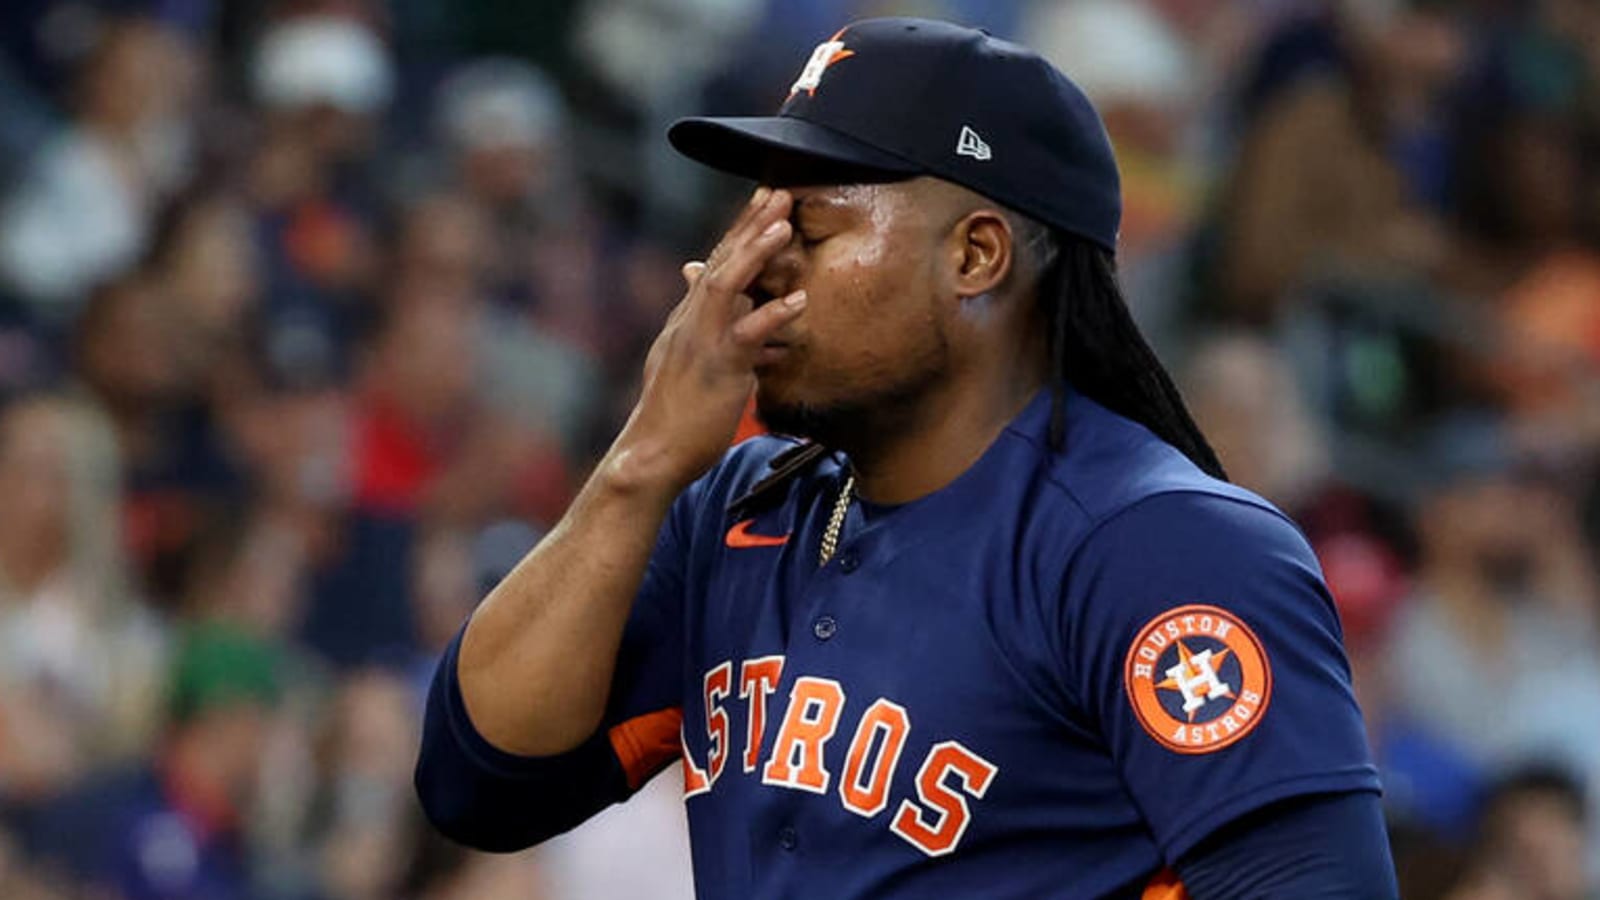 Texas ousts Detroit to return to World Series